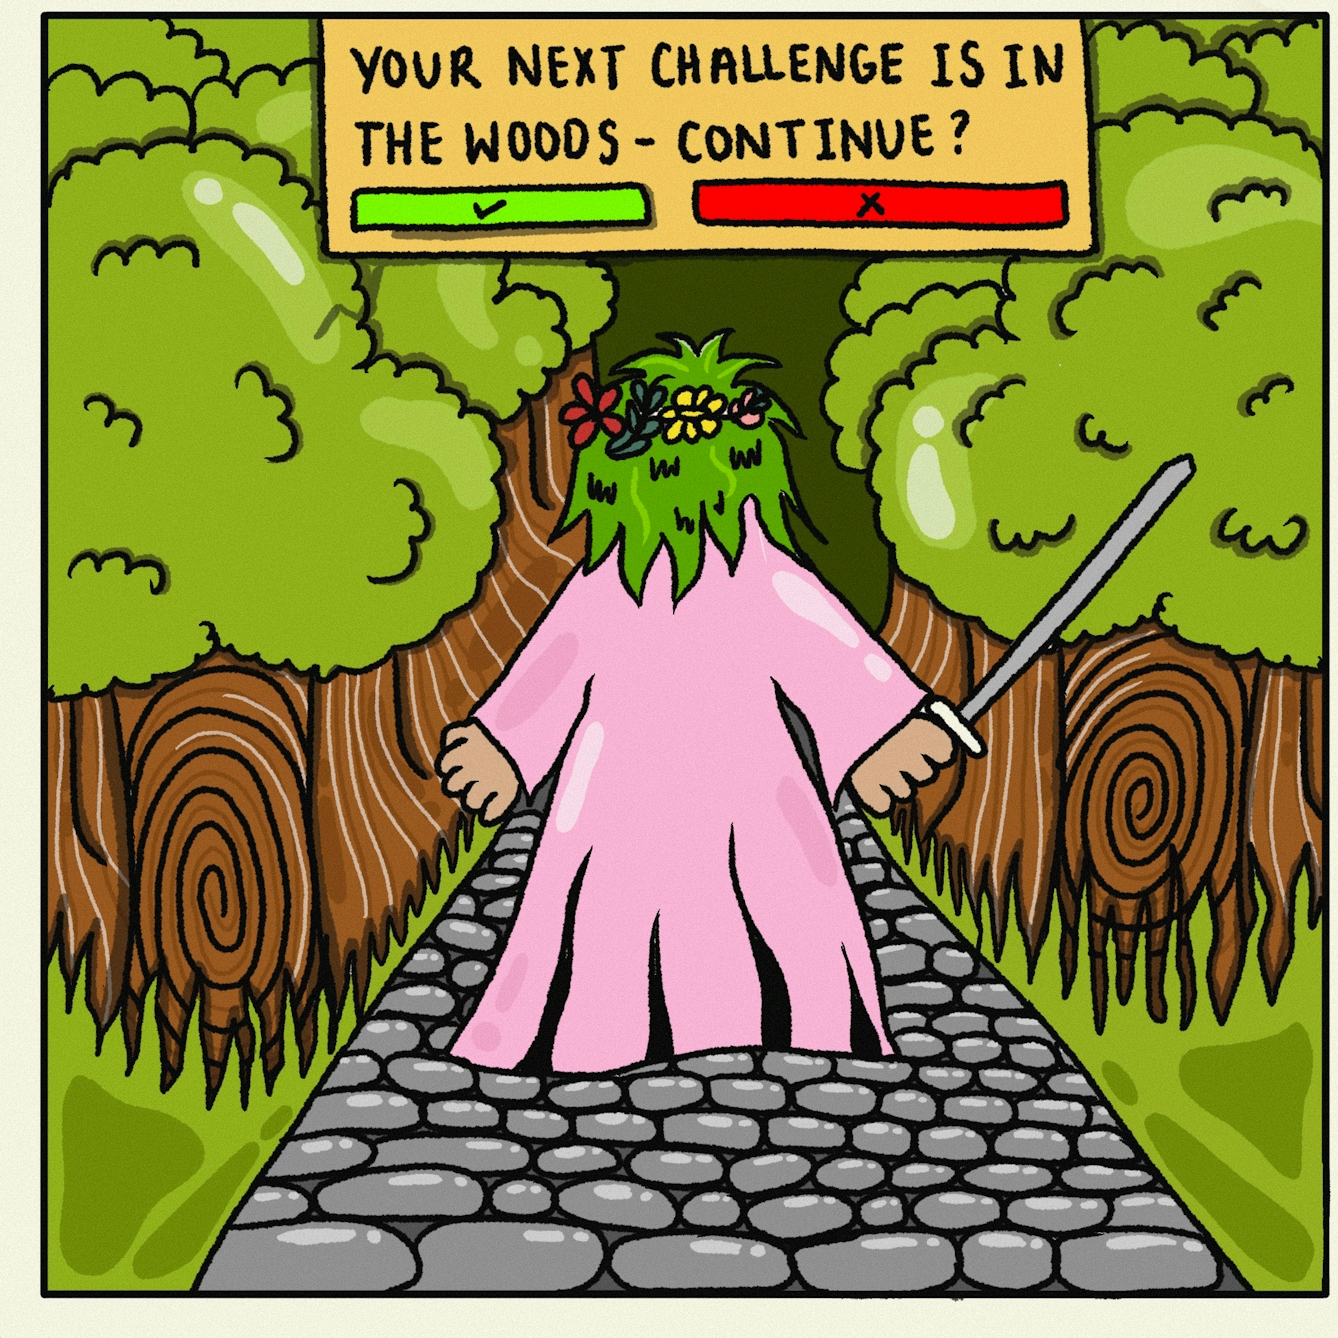 Panel 3 of a digitally drawn, four-panel comic titled ‘Nope’. The text at the top asks, “YOUR NEXT CHALLENGE IS IN THE WOODS – CONTINUE?” with a green tick or a red cross underneath. The character is holding a sword as they walk down a cobbled path surrounded by lots of trees and grass. 